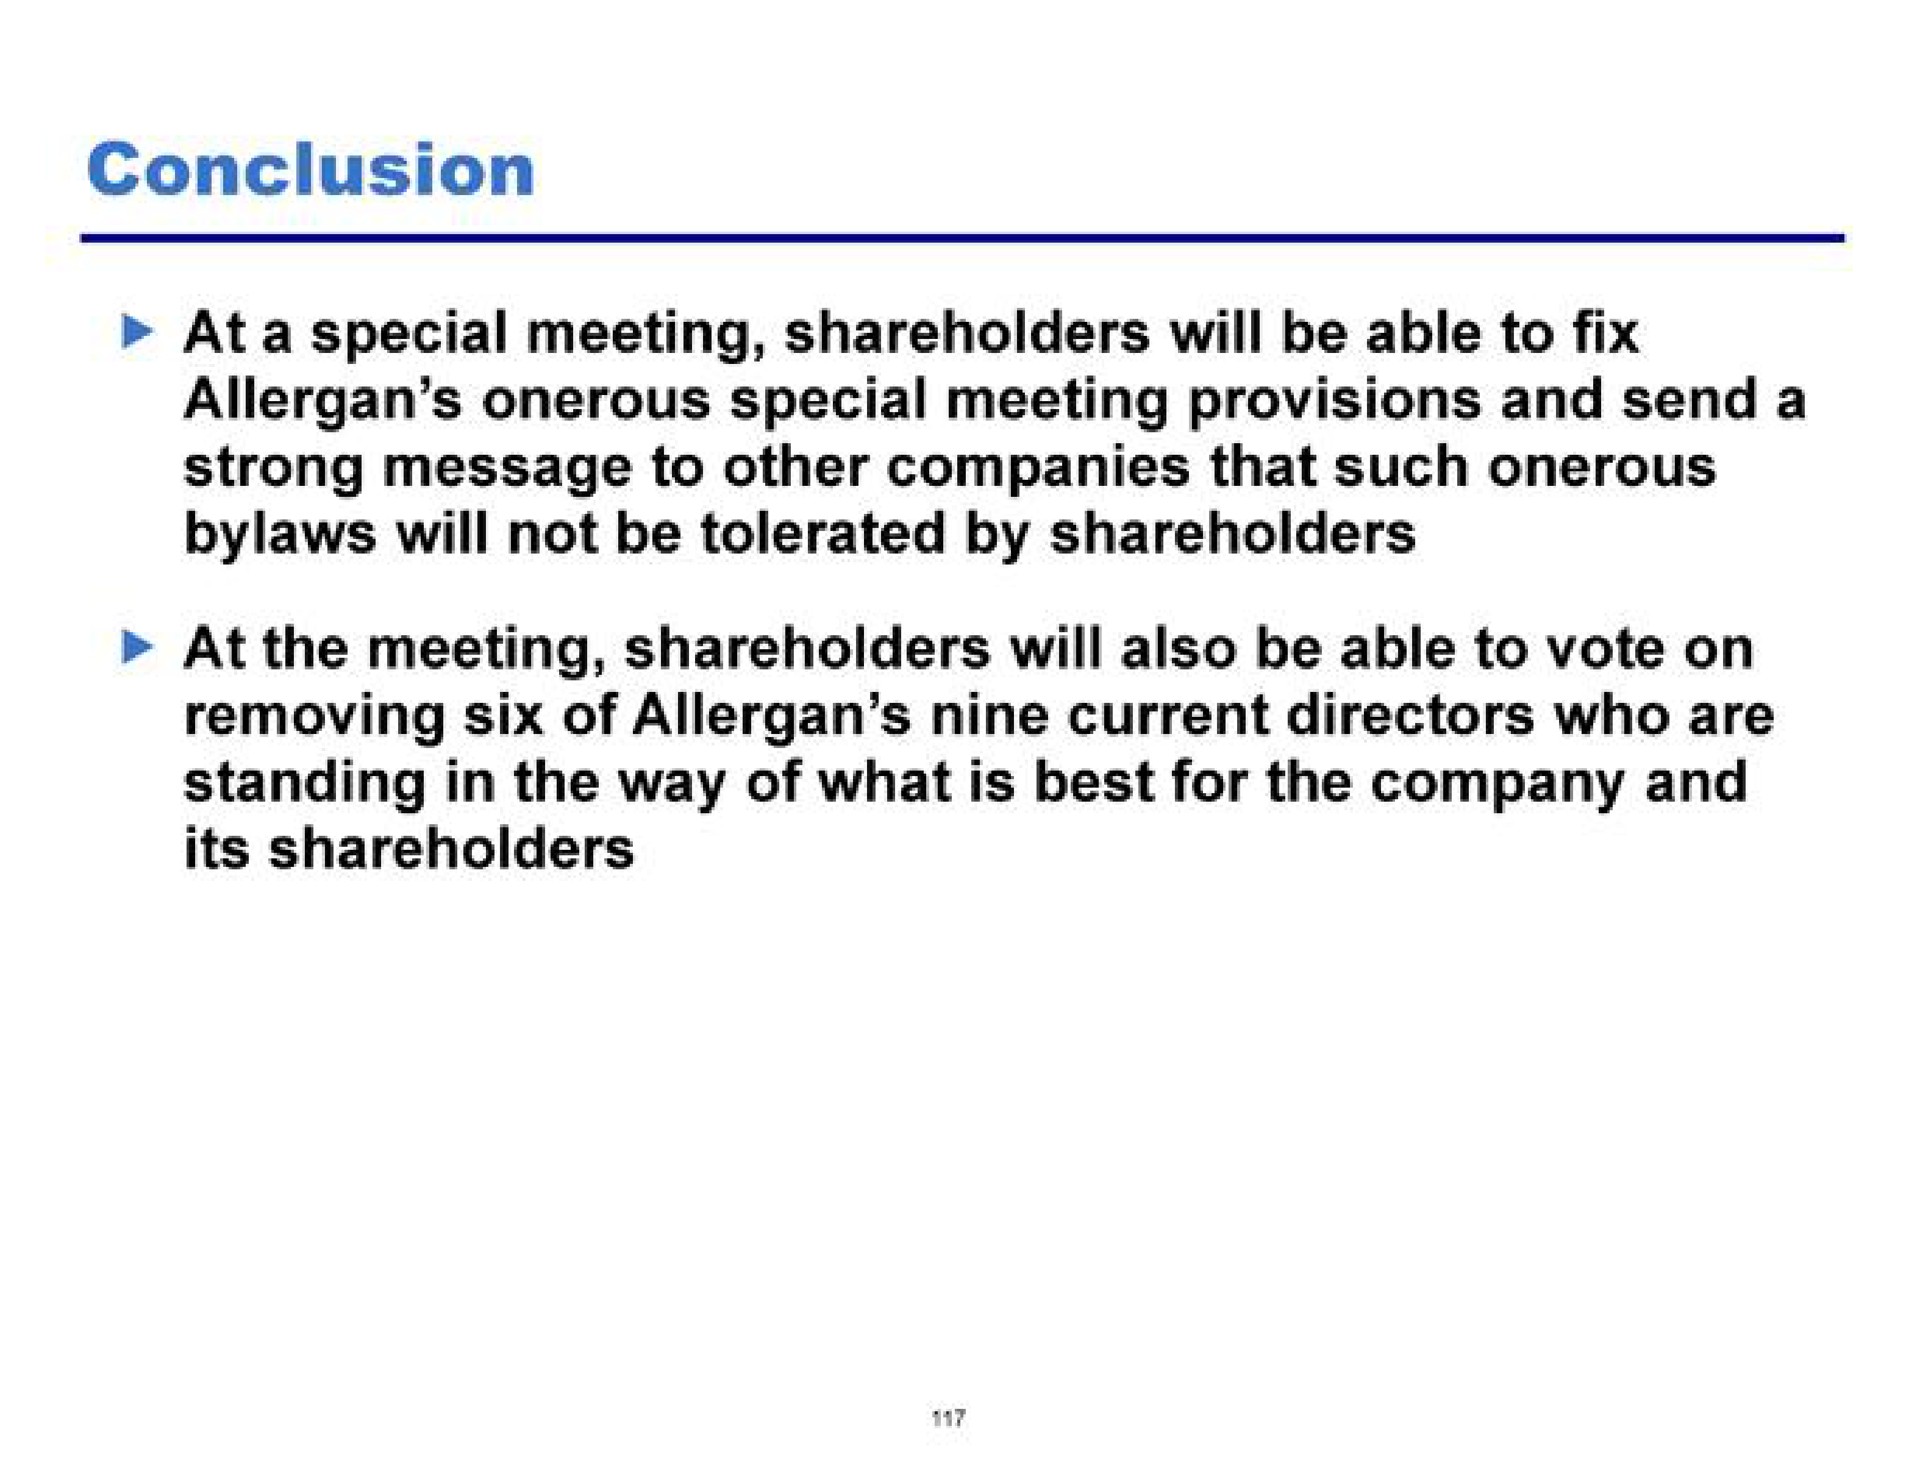 conclusion onerous special meeting provisions and send a bylaws will not be tolerated by shareholders at the meeting shareholders will also be able to vote on removing six of nine current directors who are standing in the way of what is best for the company and its shareholders | Pershing Square